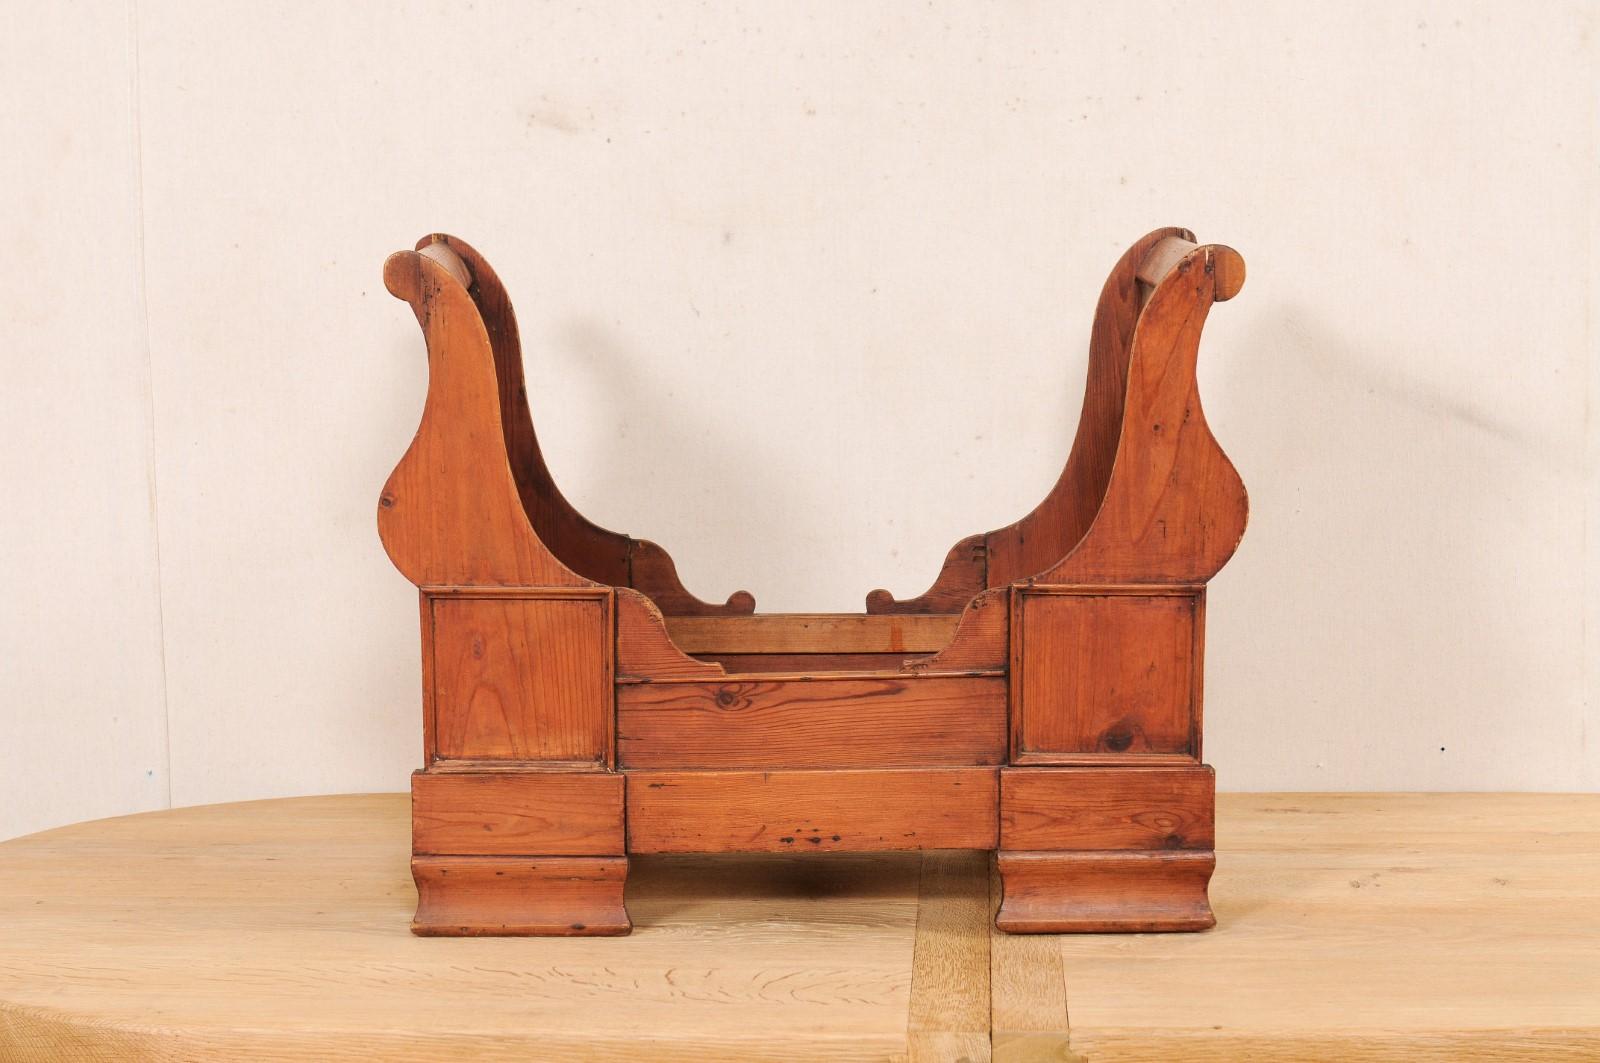 Antique Swedish Wood-Carved Sleigh Dog Bed (For the Pampered Pooch or Kitty!)  For Sale 4